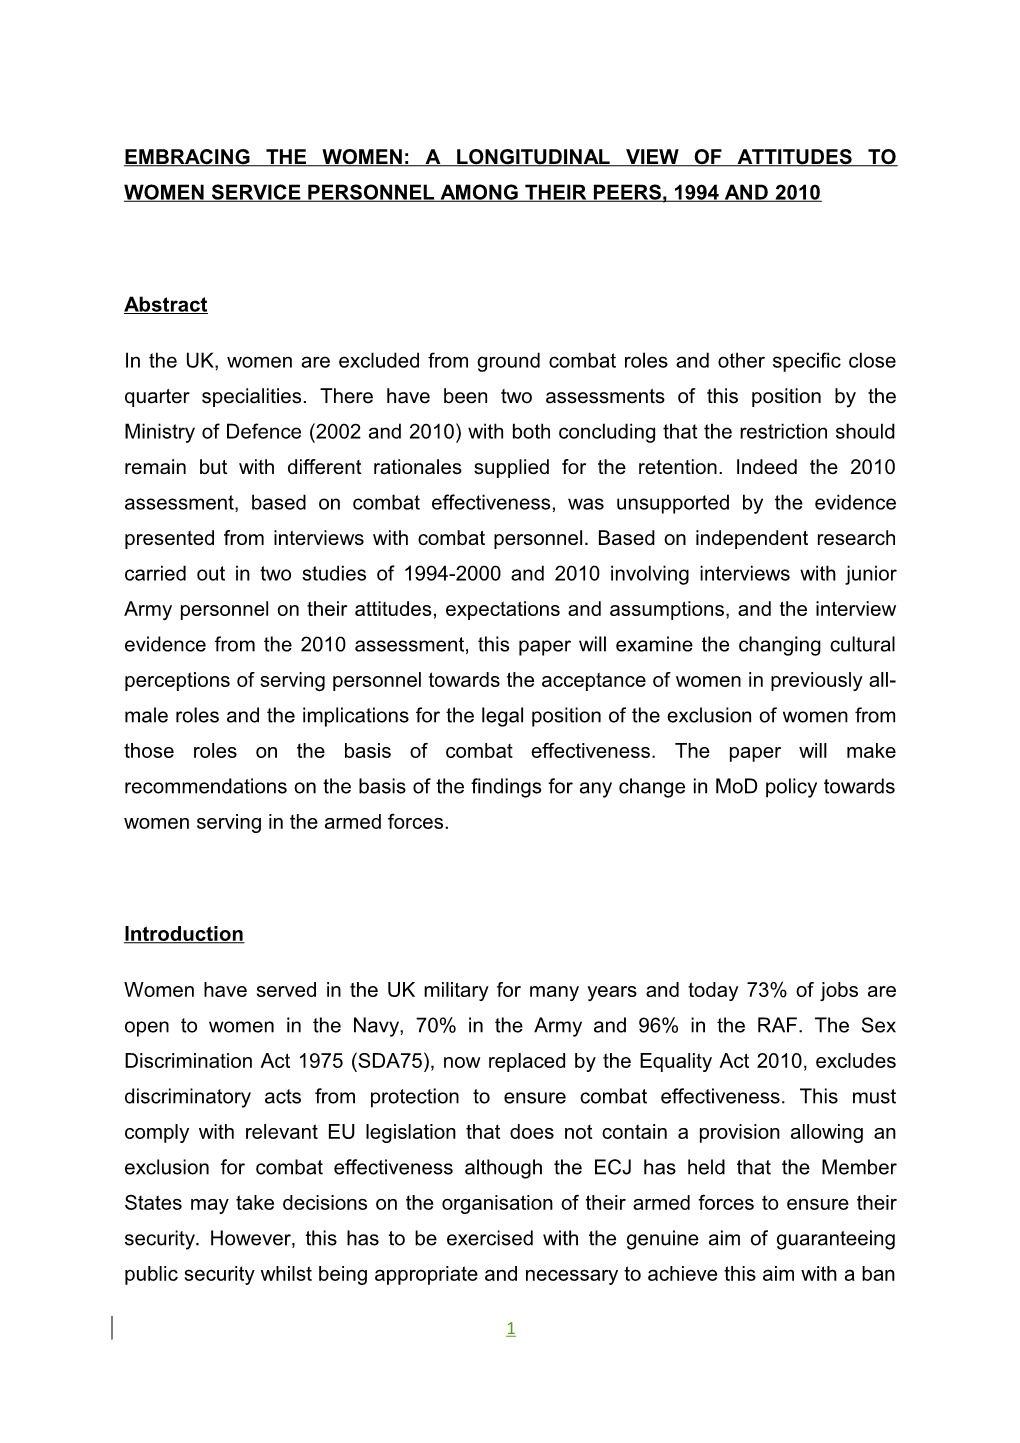 Embracing the Women: a Longitudinal View of Attitudes to Women Service Personnel Among